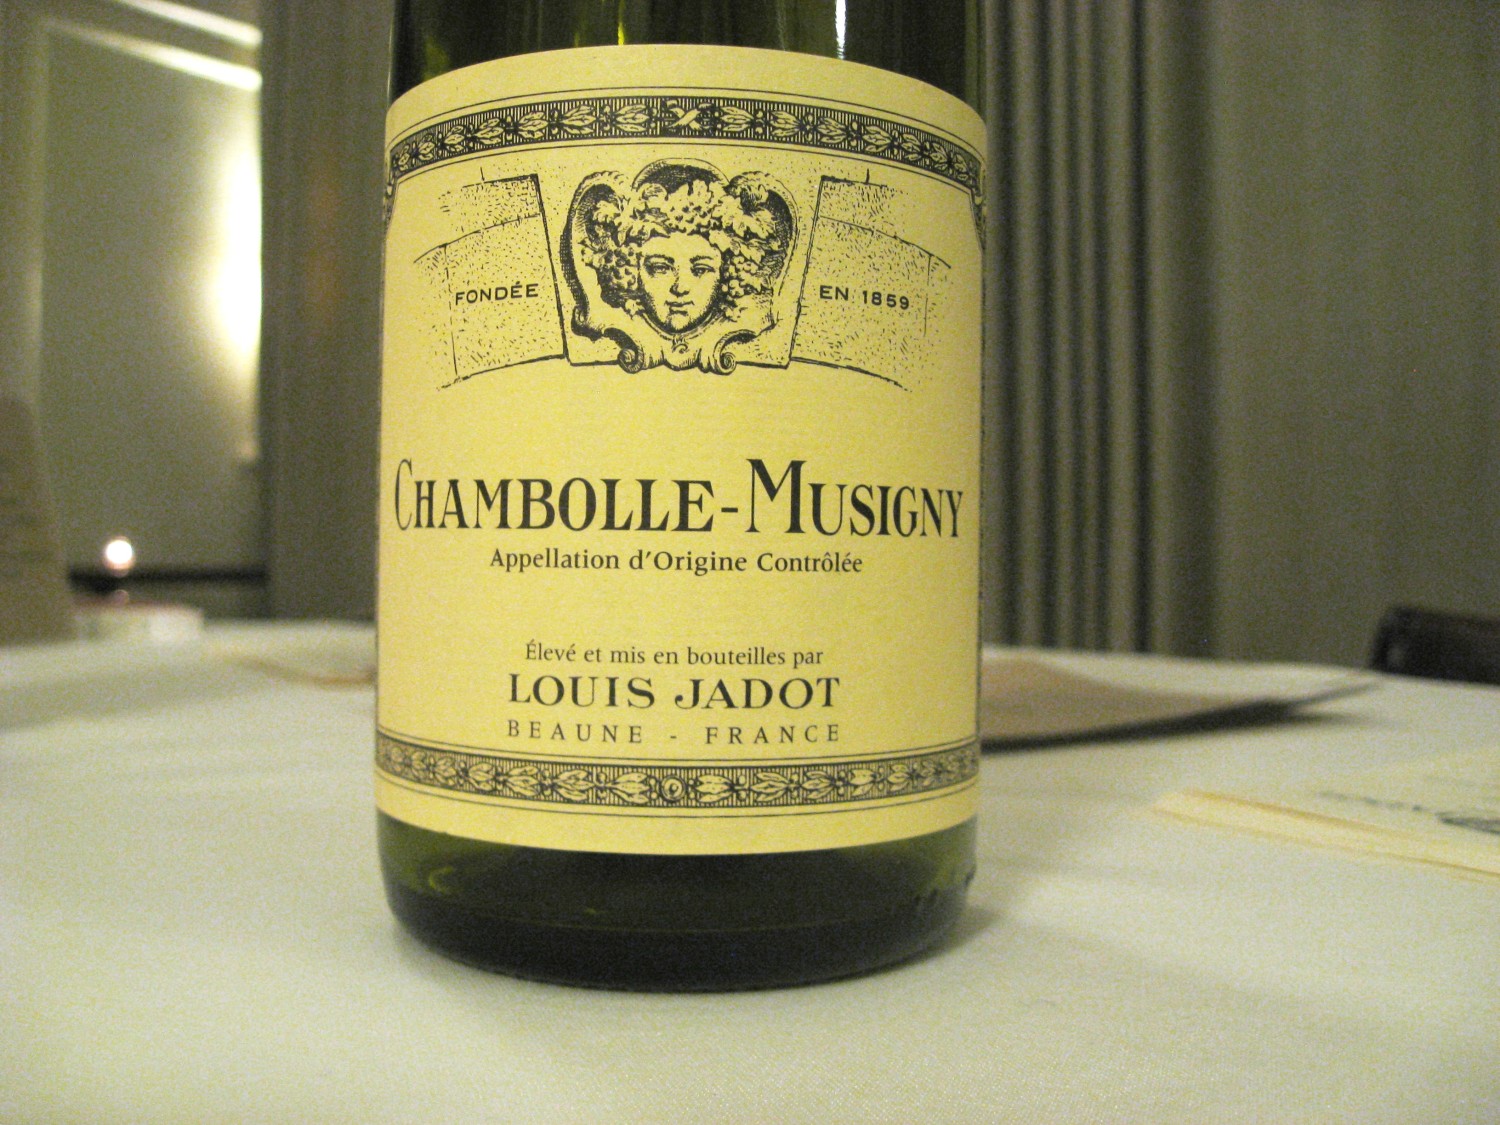 Domaine Louis Jadot, Chambolle-Musigny 2012, Beaune, France, Wine Casual